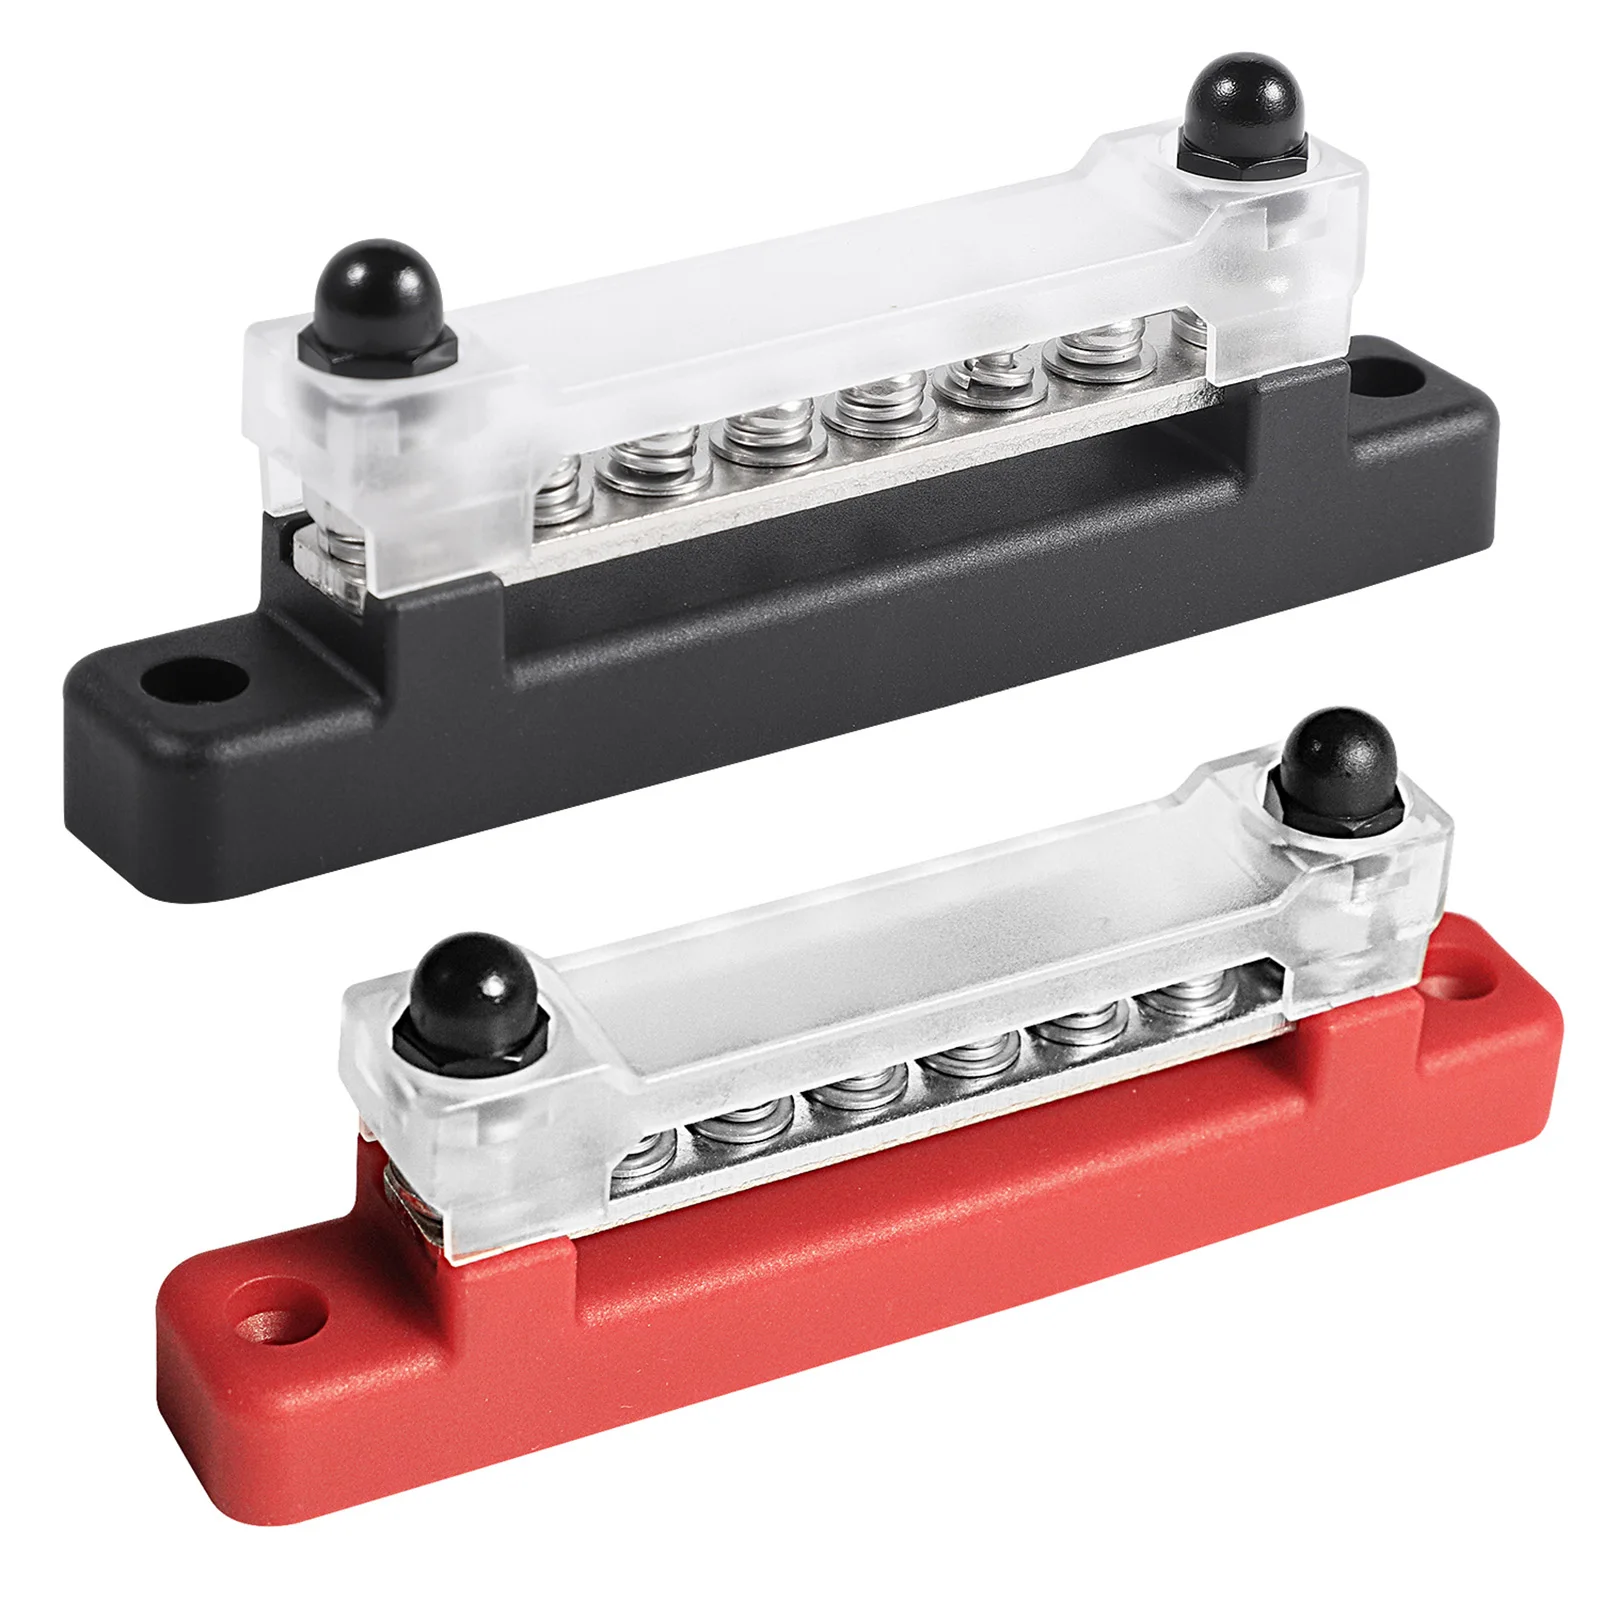 Power Distribution Terminal Block for Automotive and Marine 150A Bus Bar Block with Cover & Heat Shrink Terminals; Ground Distribution Rebuild Skills 6 Terminal Bus Bar Kit Red 